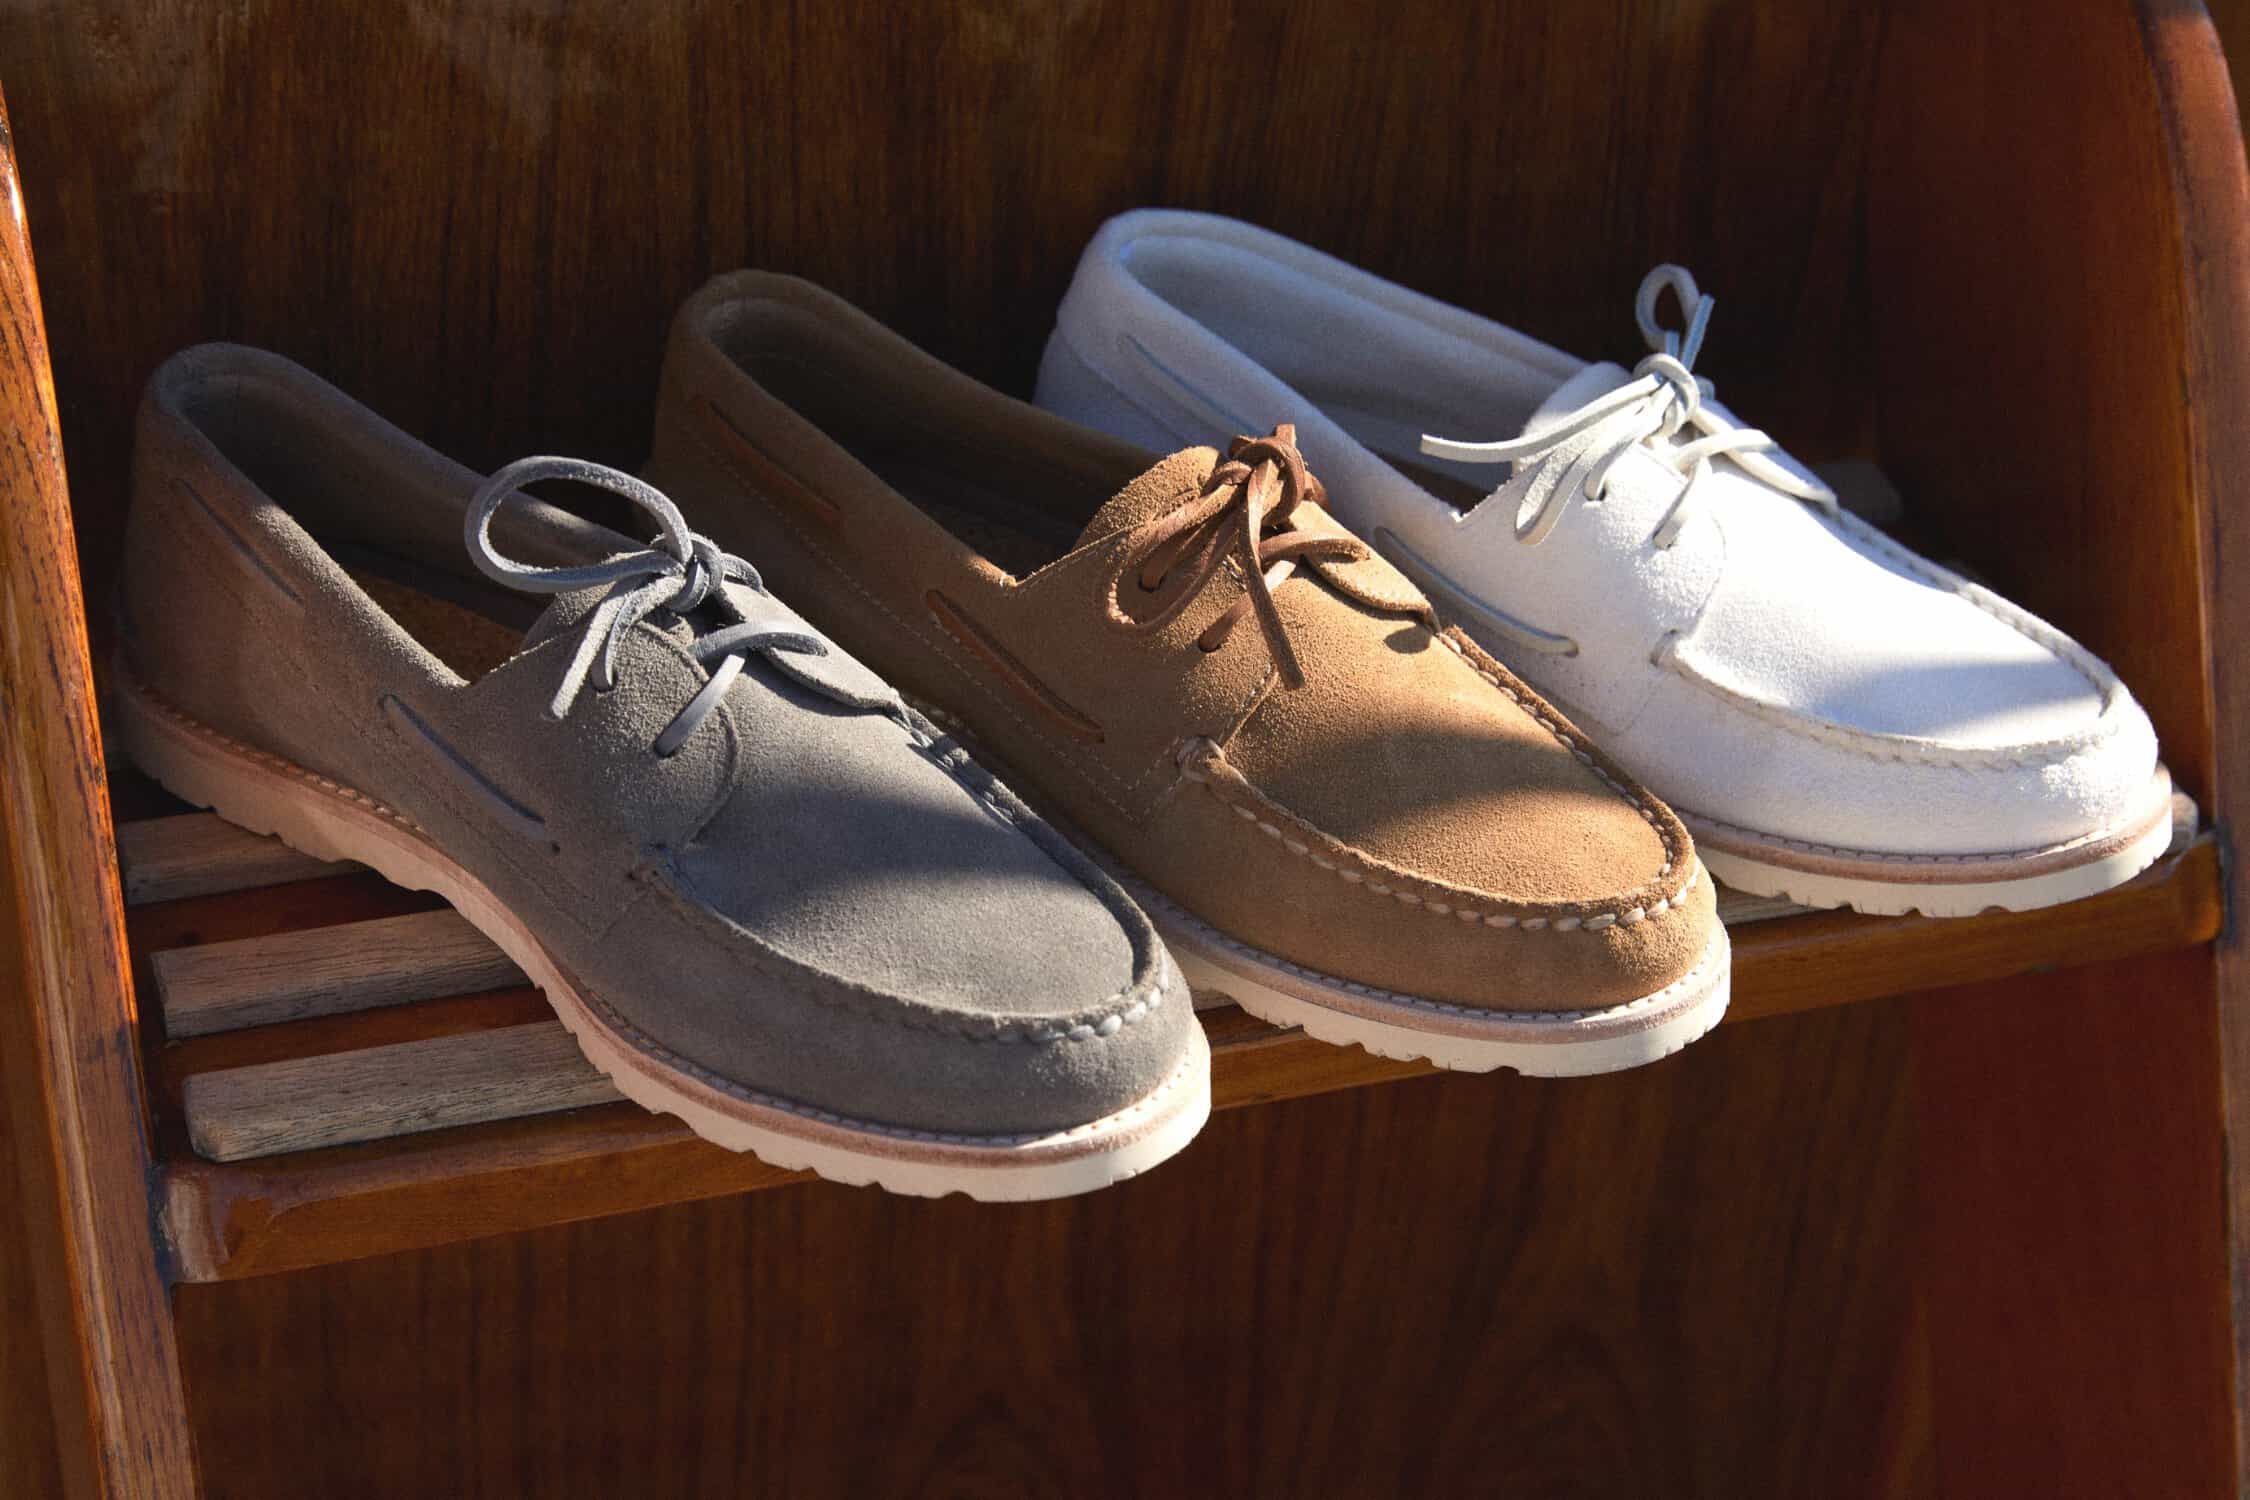 Todd Snyder, Sperry, collaborations, shoes